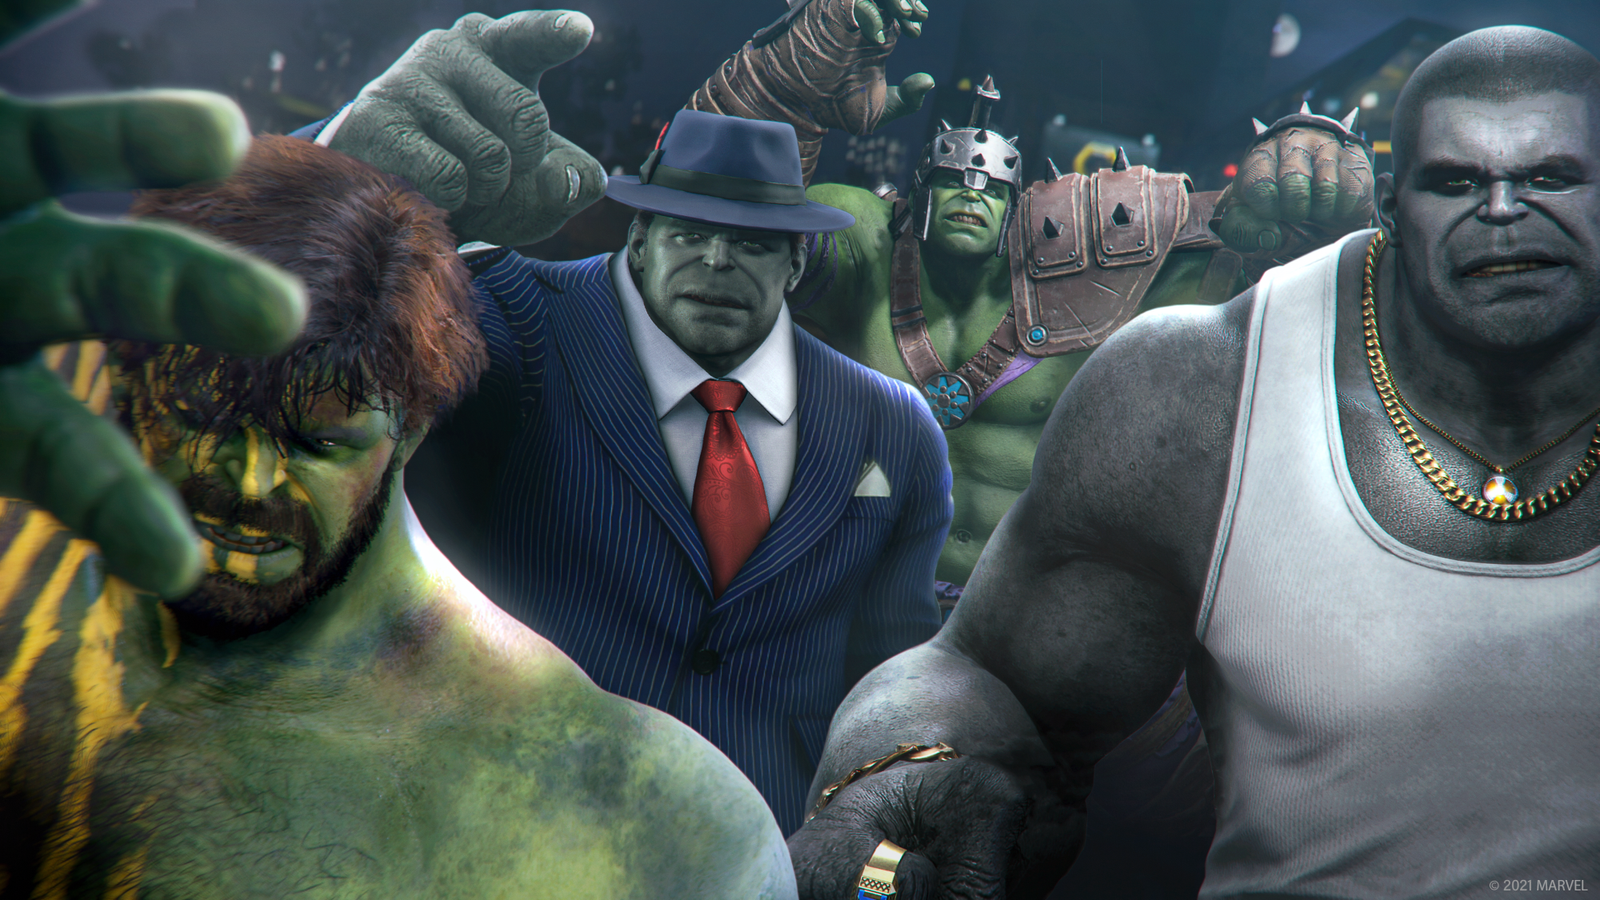 A group of Hulks in different skins from Marvel's Avengers.